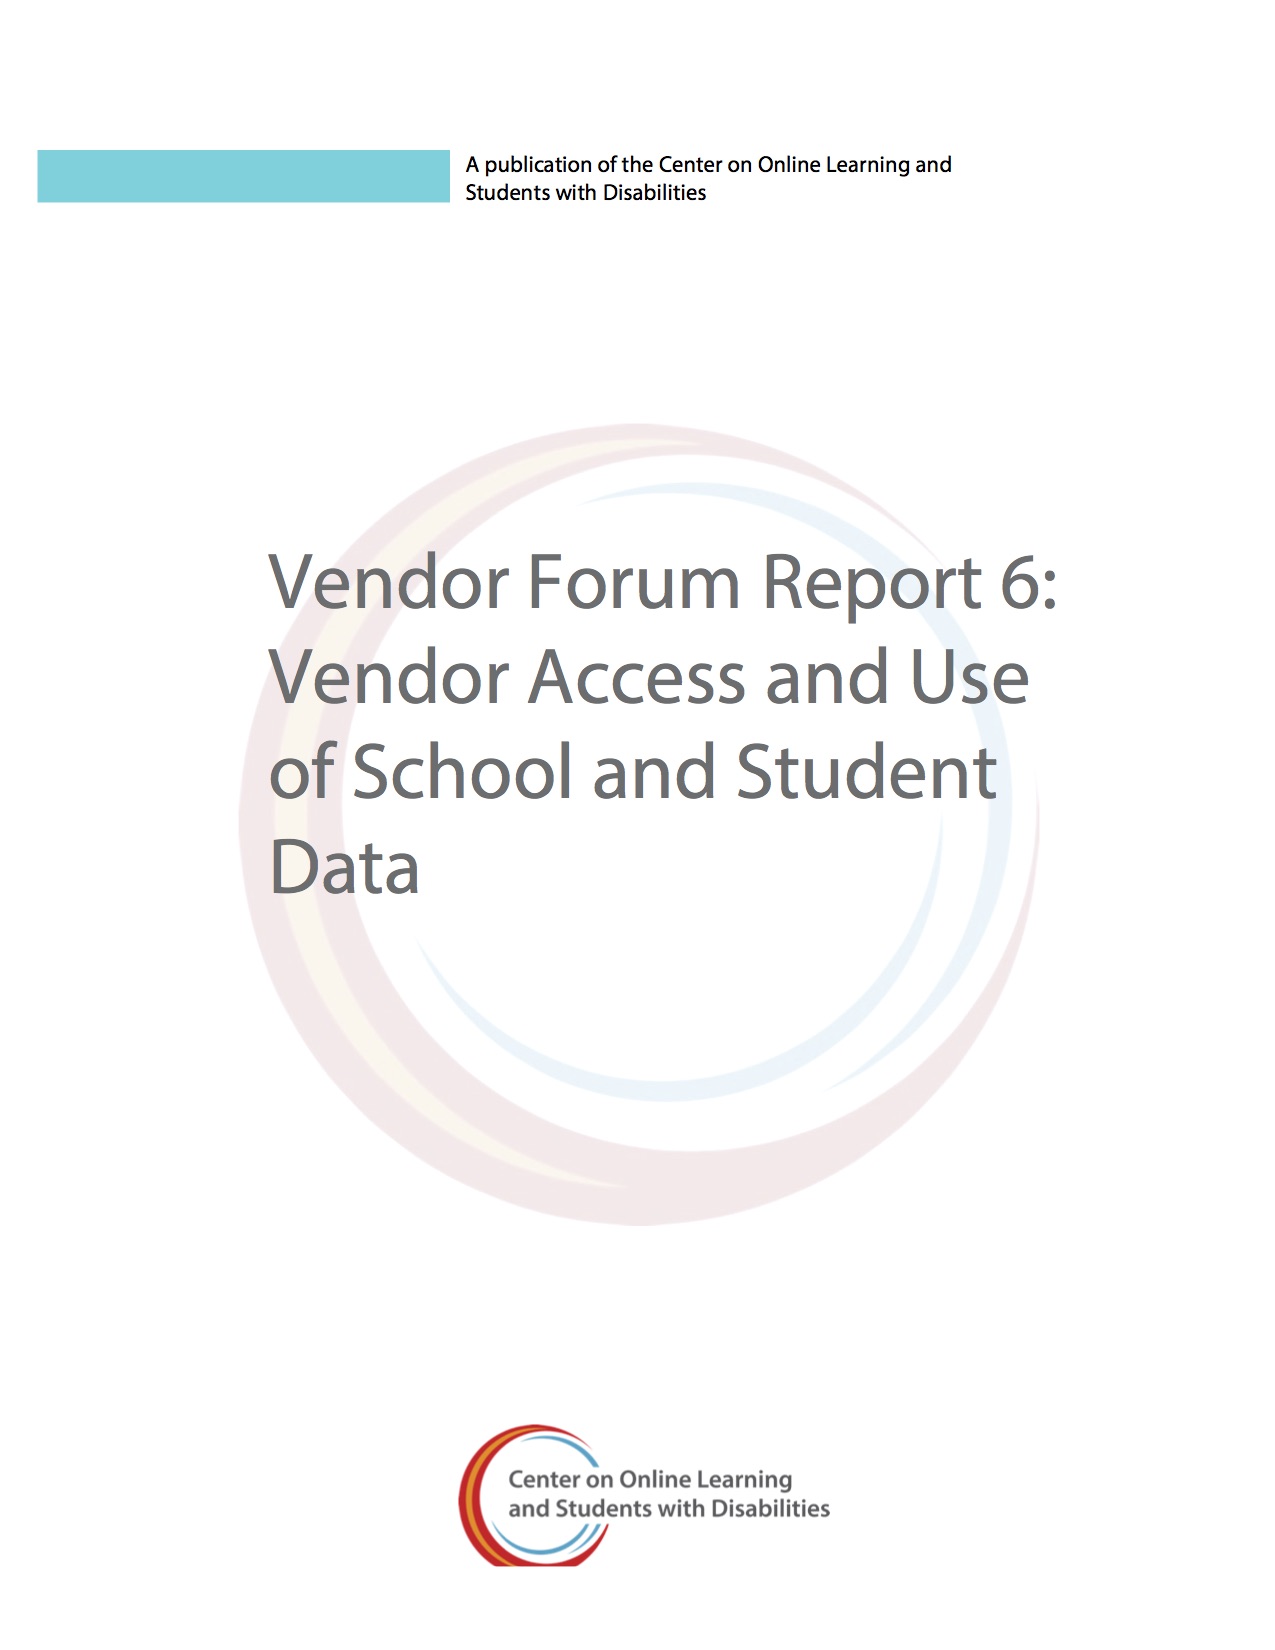 Vendor Forum Report 6: Vendor Access And Use Of School And Student Data